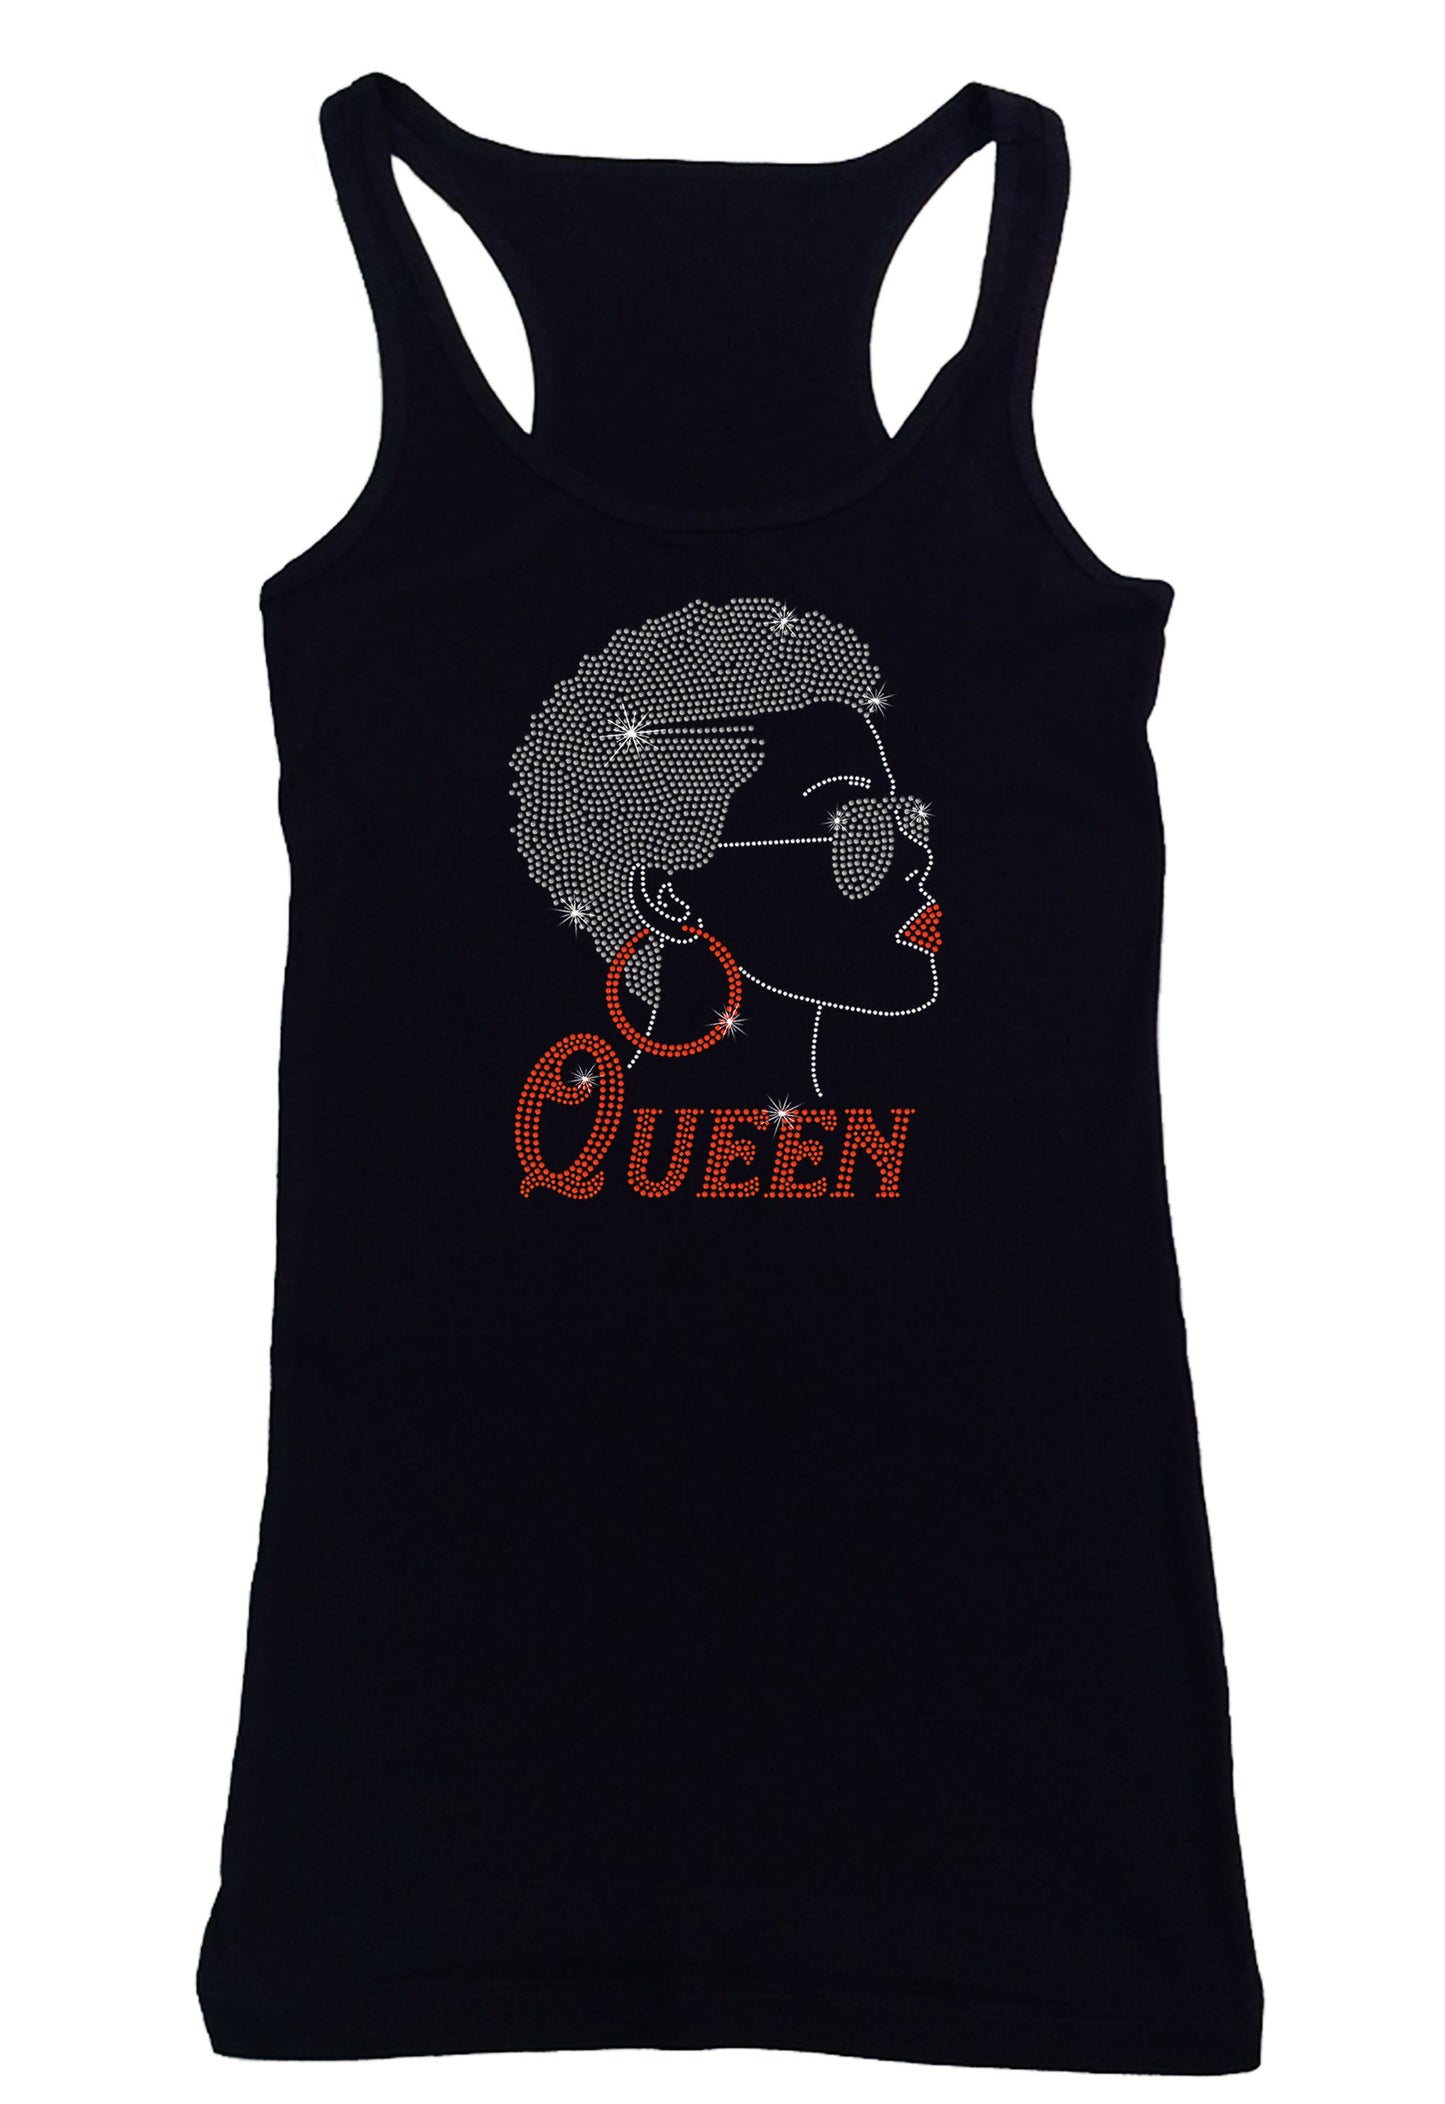 Women's Rhinestone Fitted Tight Snug Shirt Afro Girl with Short Hair and Glasses - Hoop Earrings, Queen